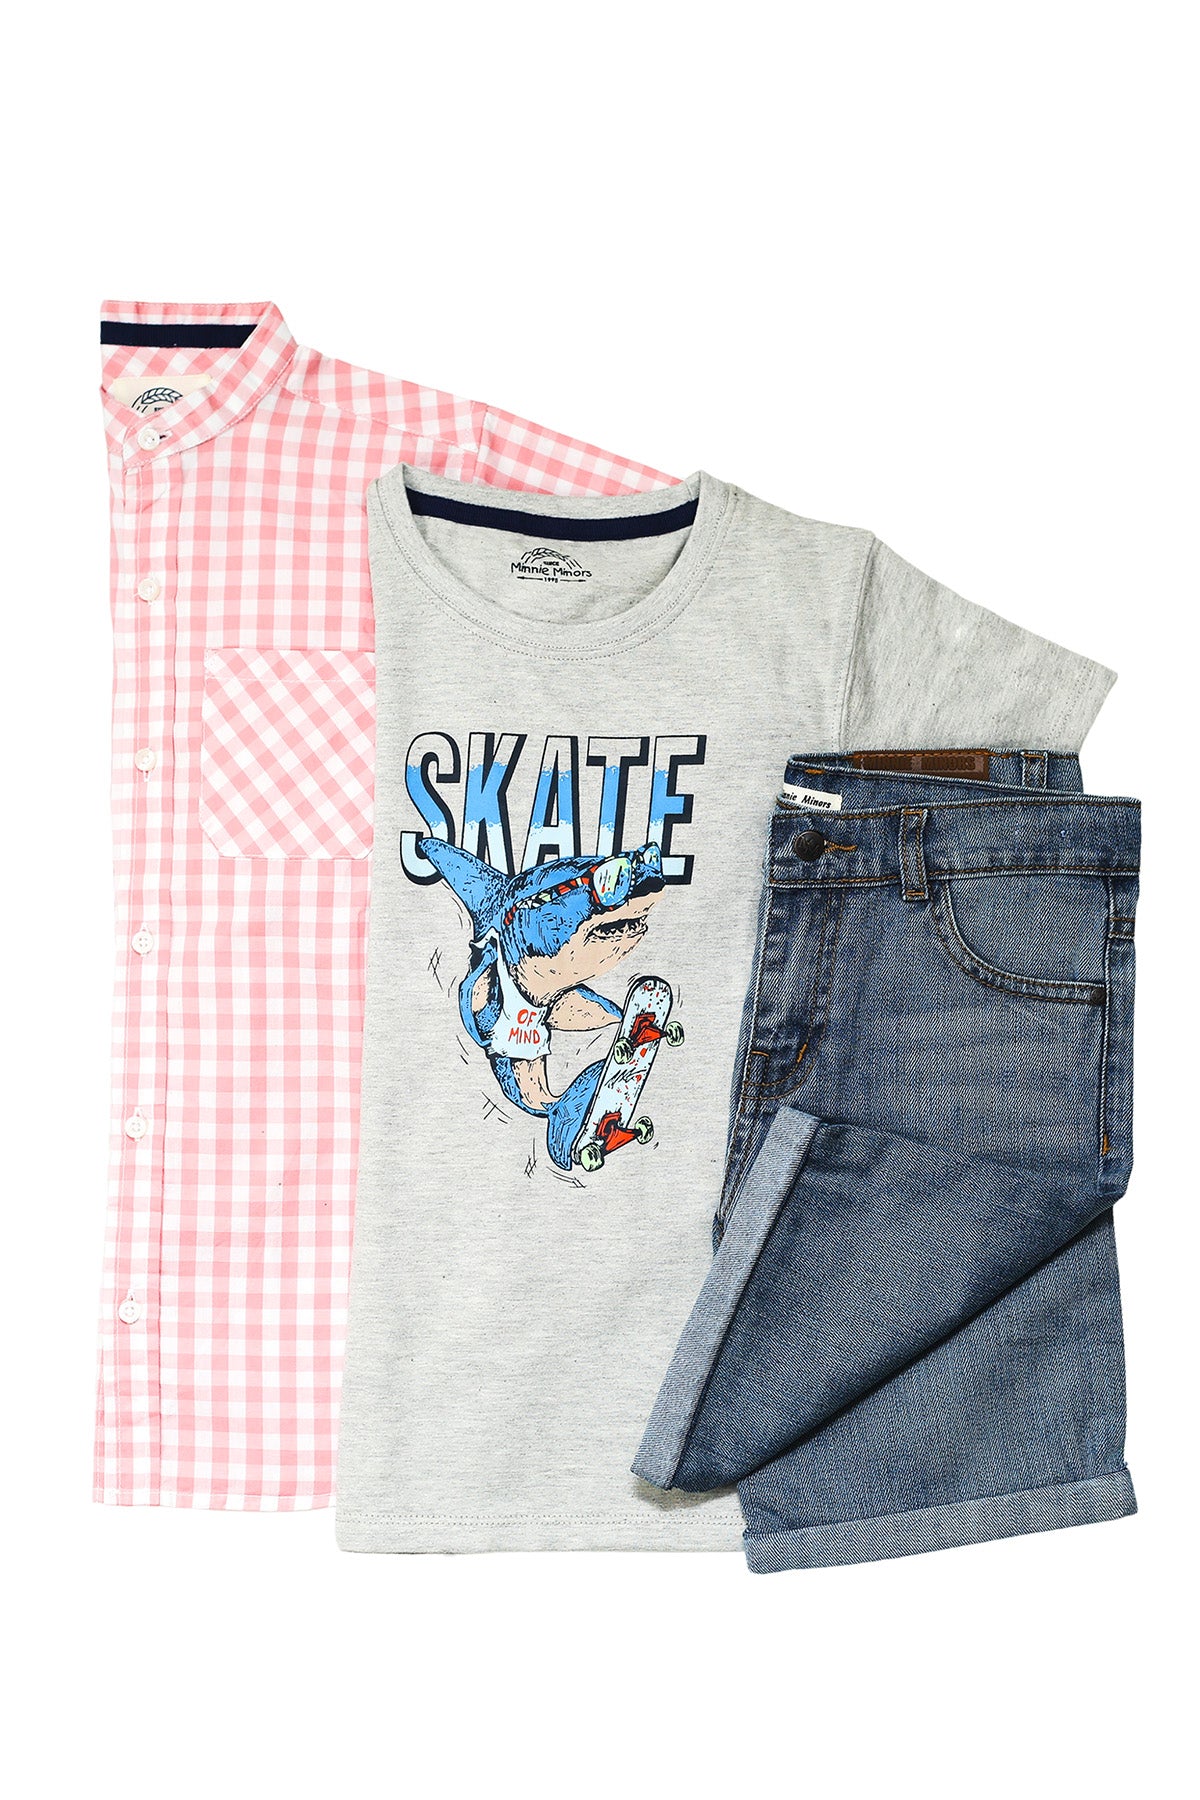 Short Sleeve Checkered Shirt With Graphic T-Shirt And Shorts (SST-137)